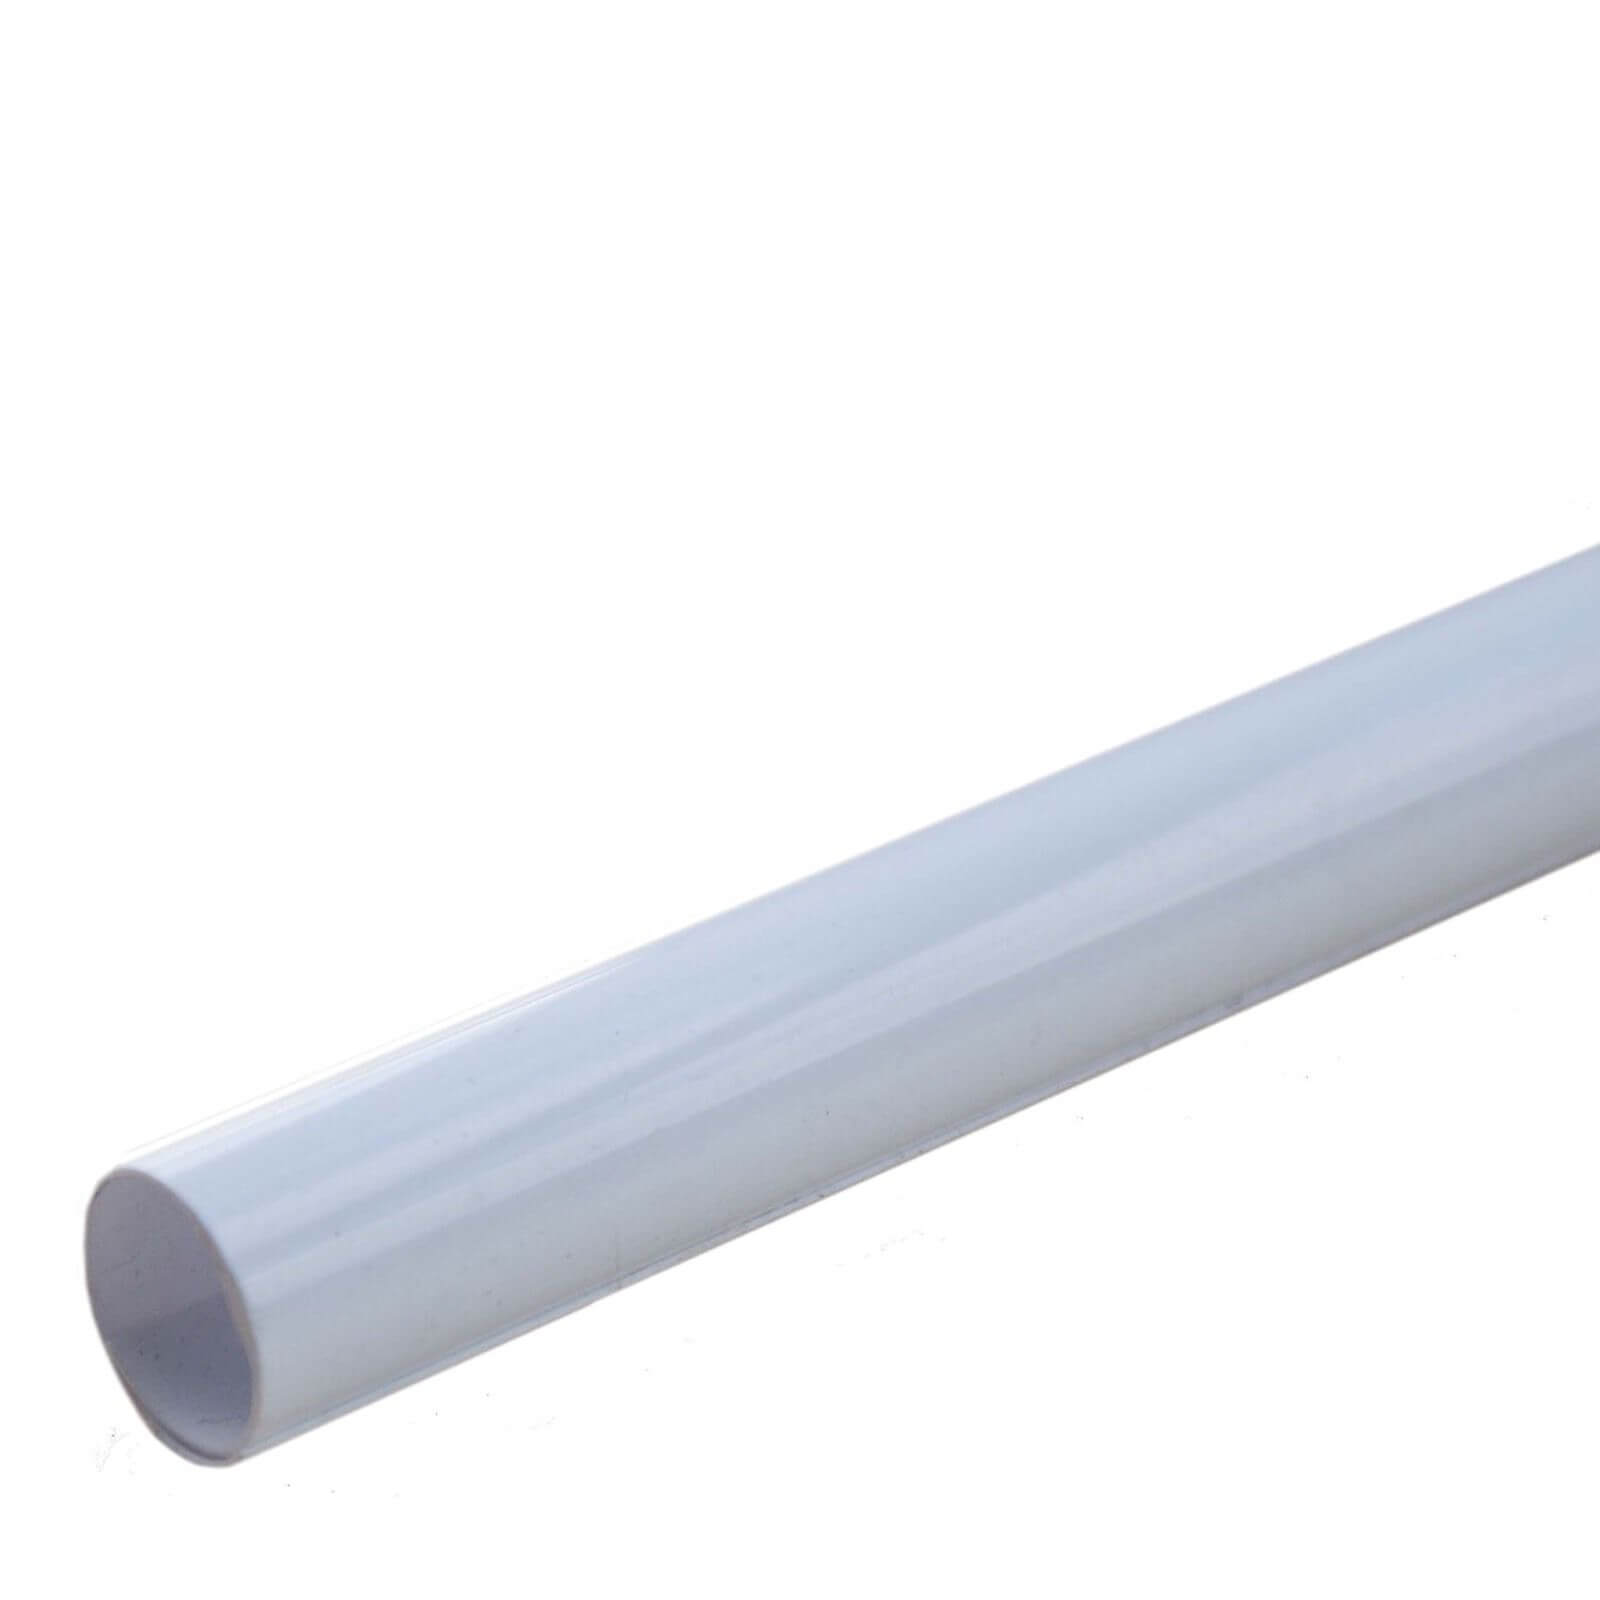 Radsnaps Pipe Covers - White Finish - 20.5cm - 10 Pack